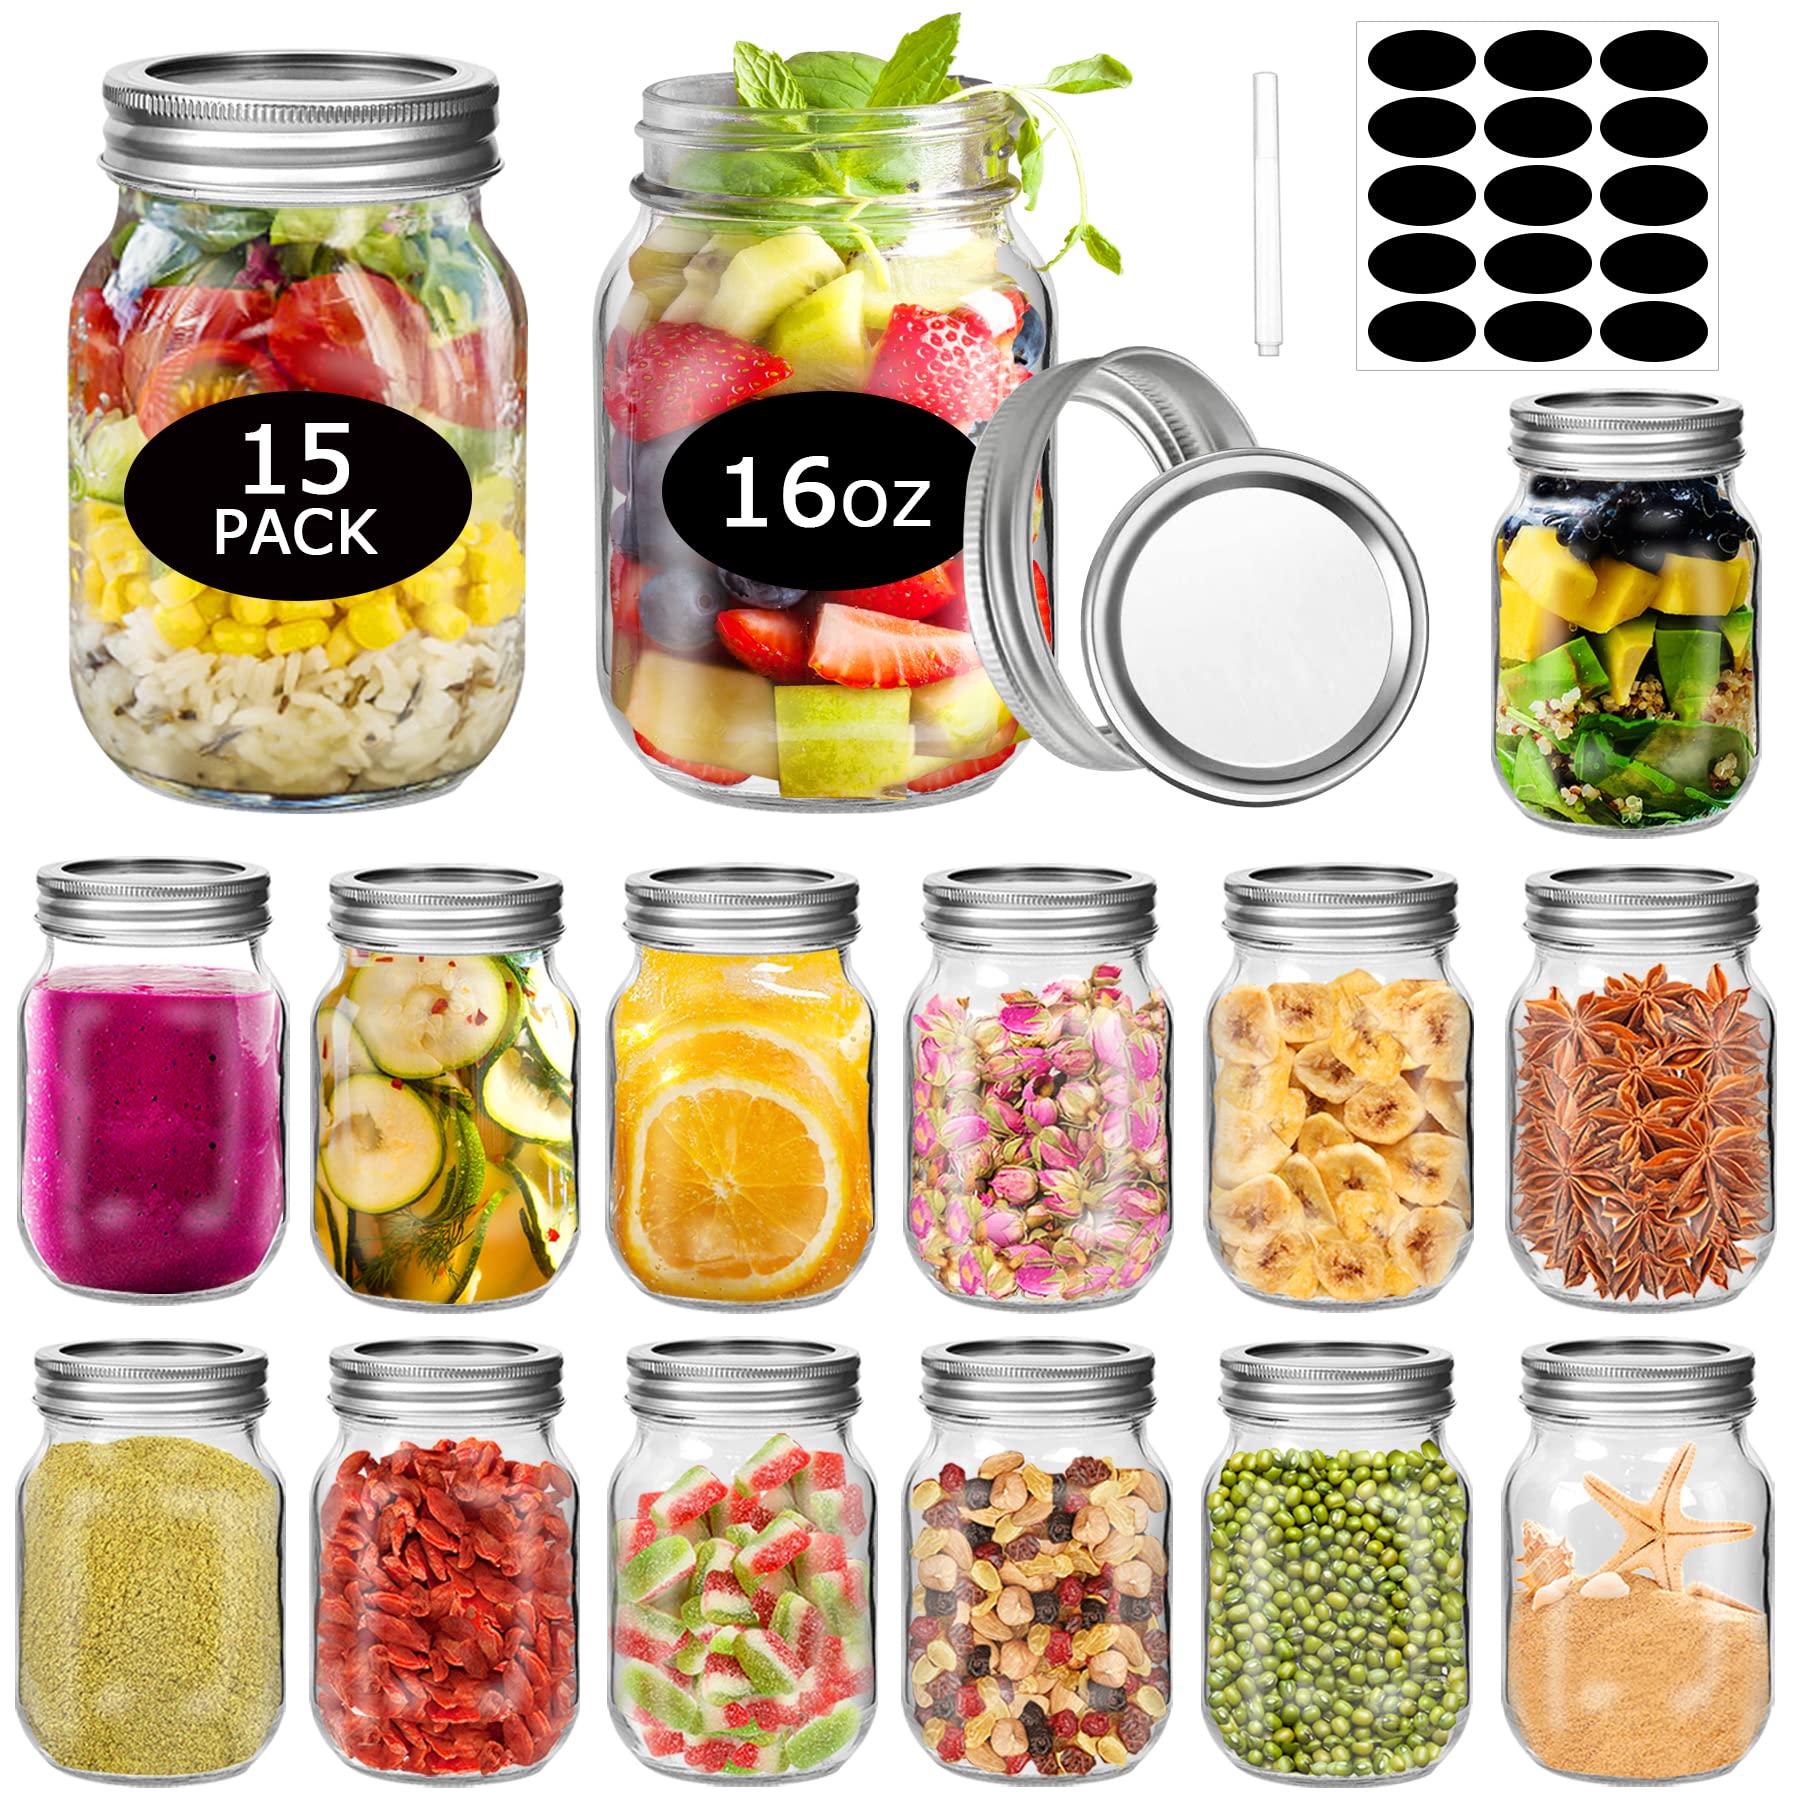 SLifeJars Mason Jars 15 Pcs 16OZ Regular Mouth Clear Glass Mason Canning Jars with Airtight Leak-Proof Lids and Bands Eco-Friendly and Reusable Eas...